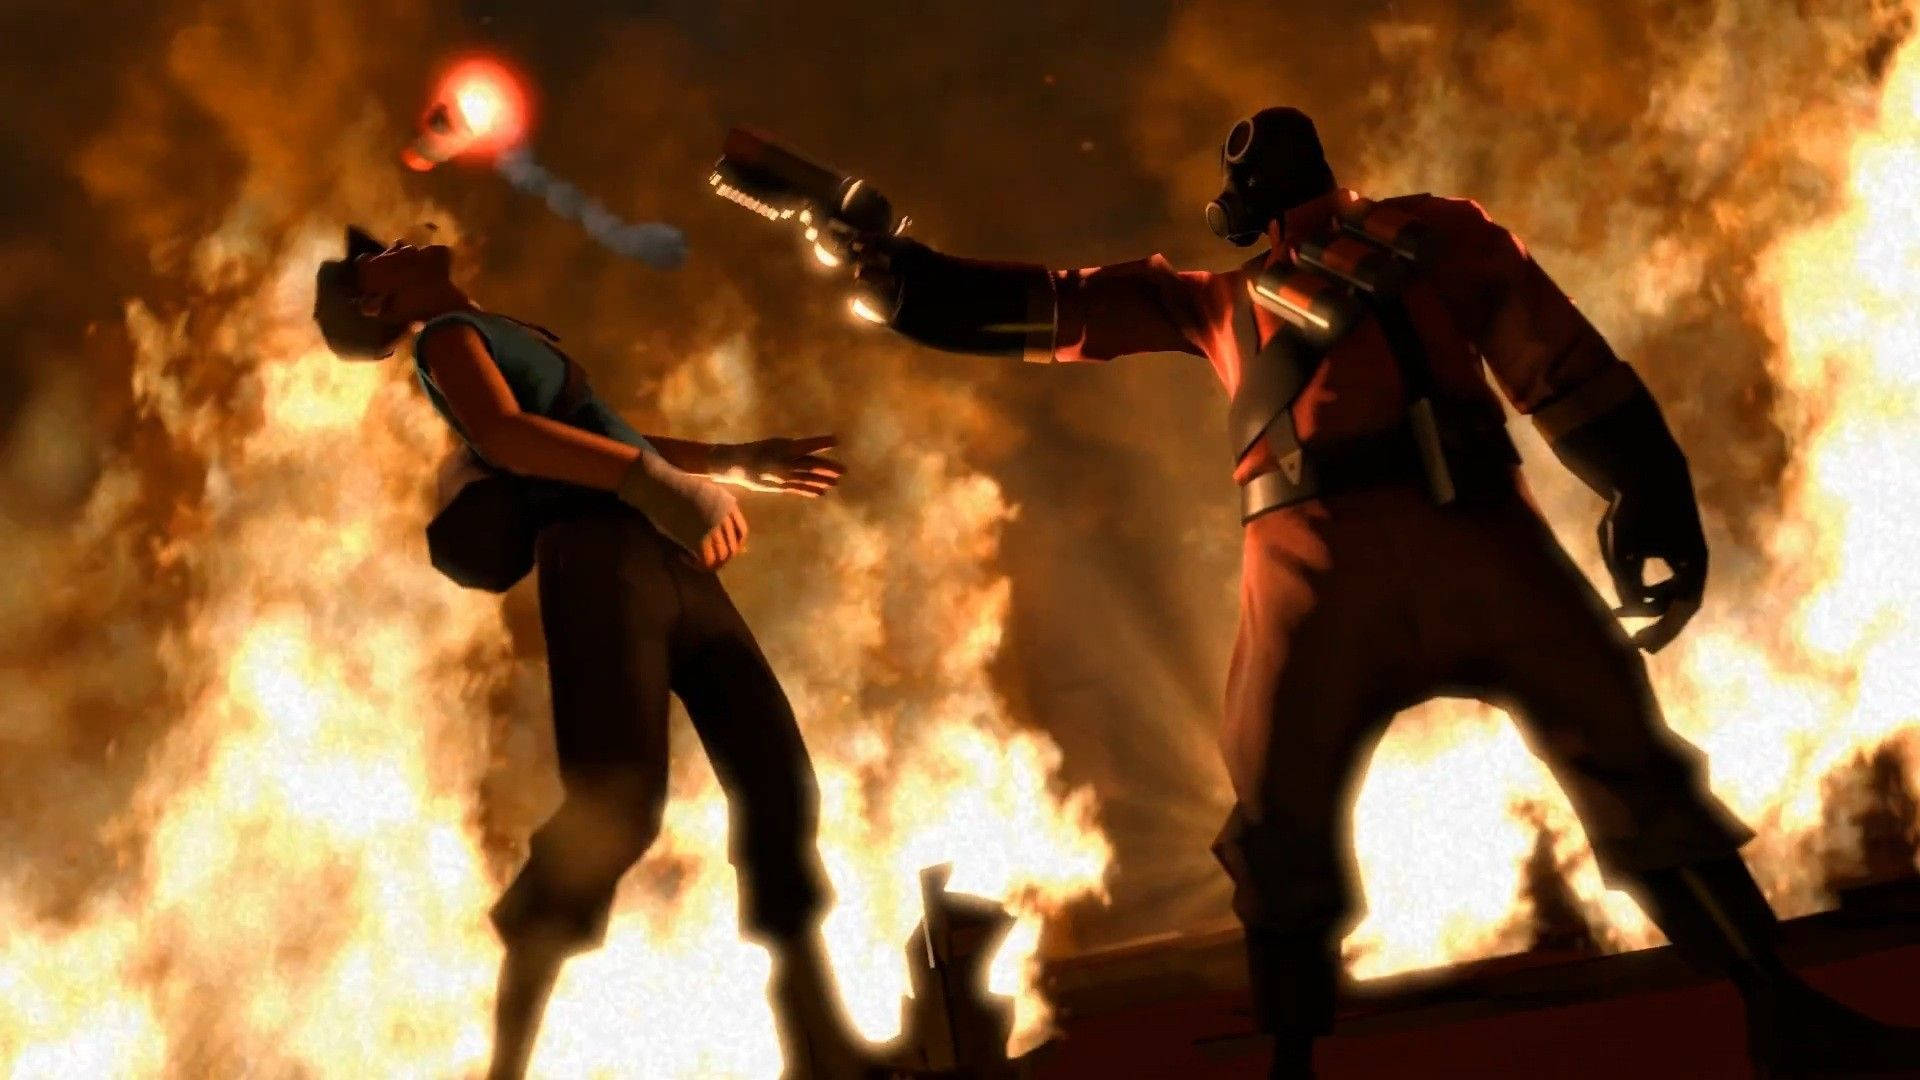 Epic Battle Scene Between Pyro And Scout - Team Fortress 2 Background